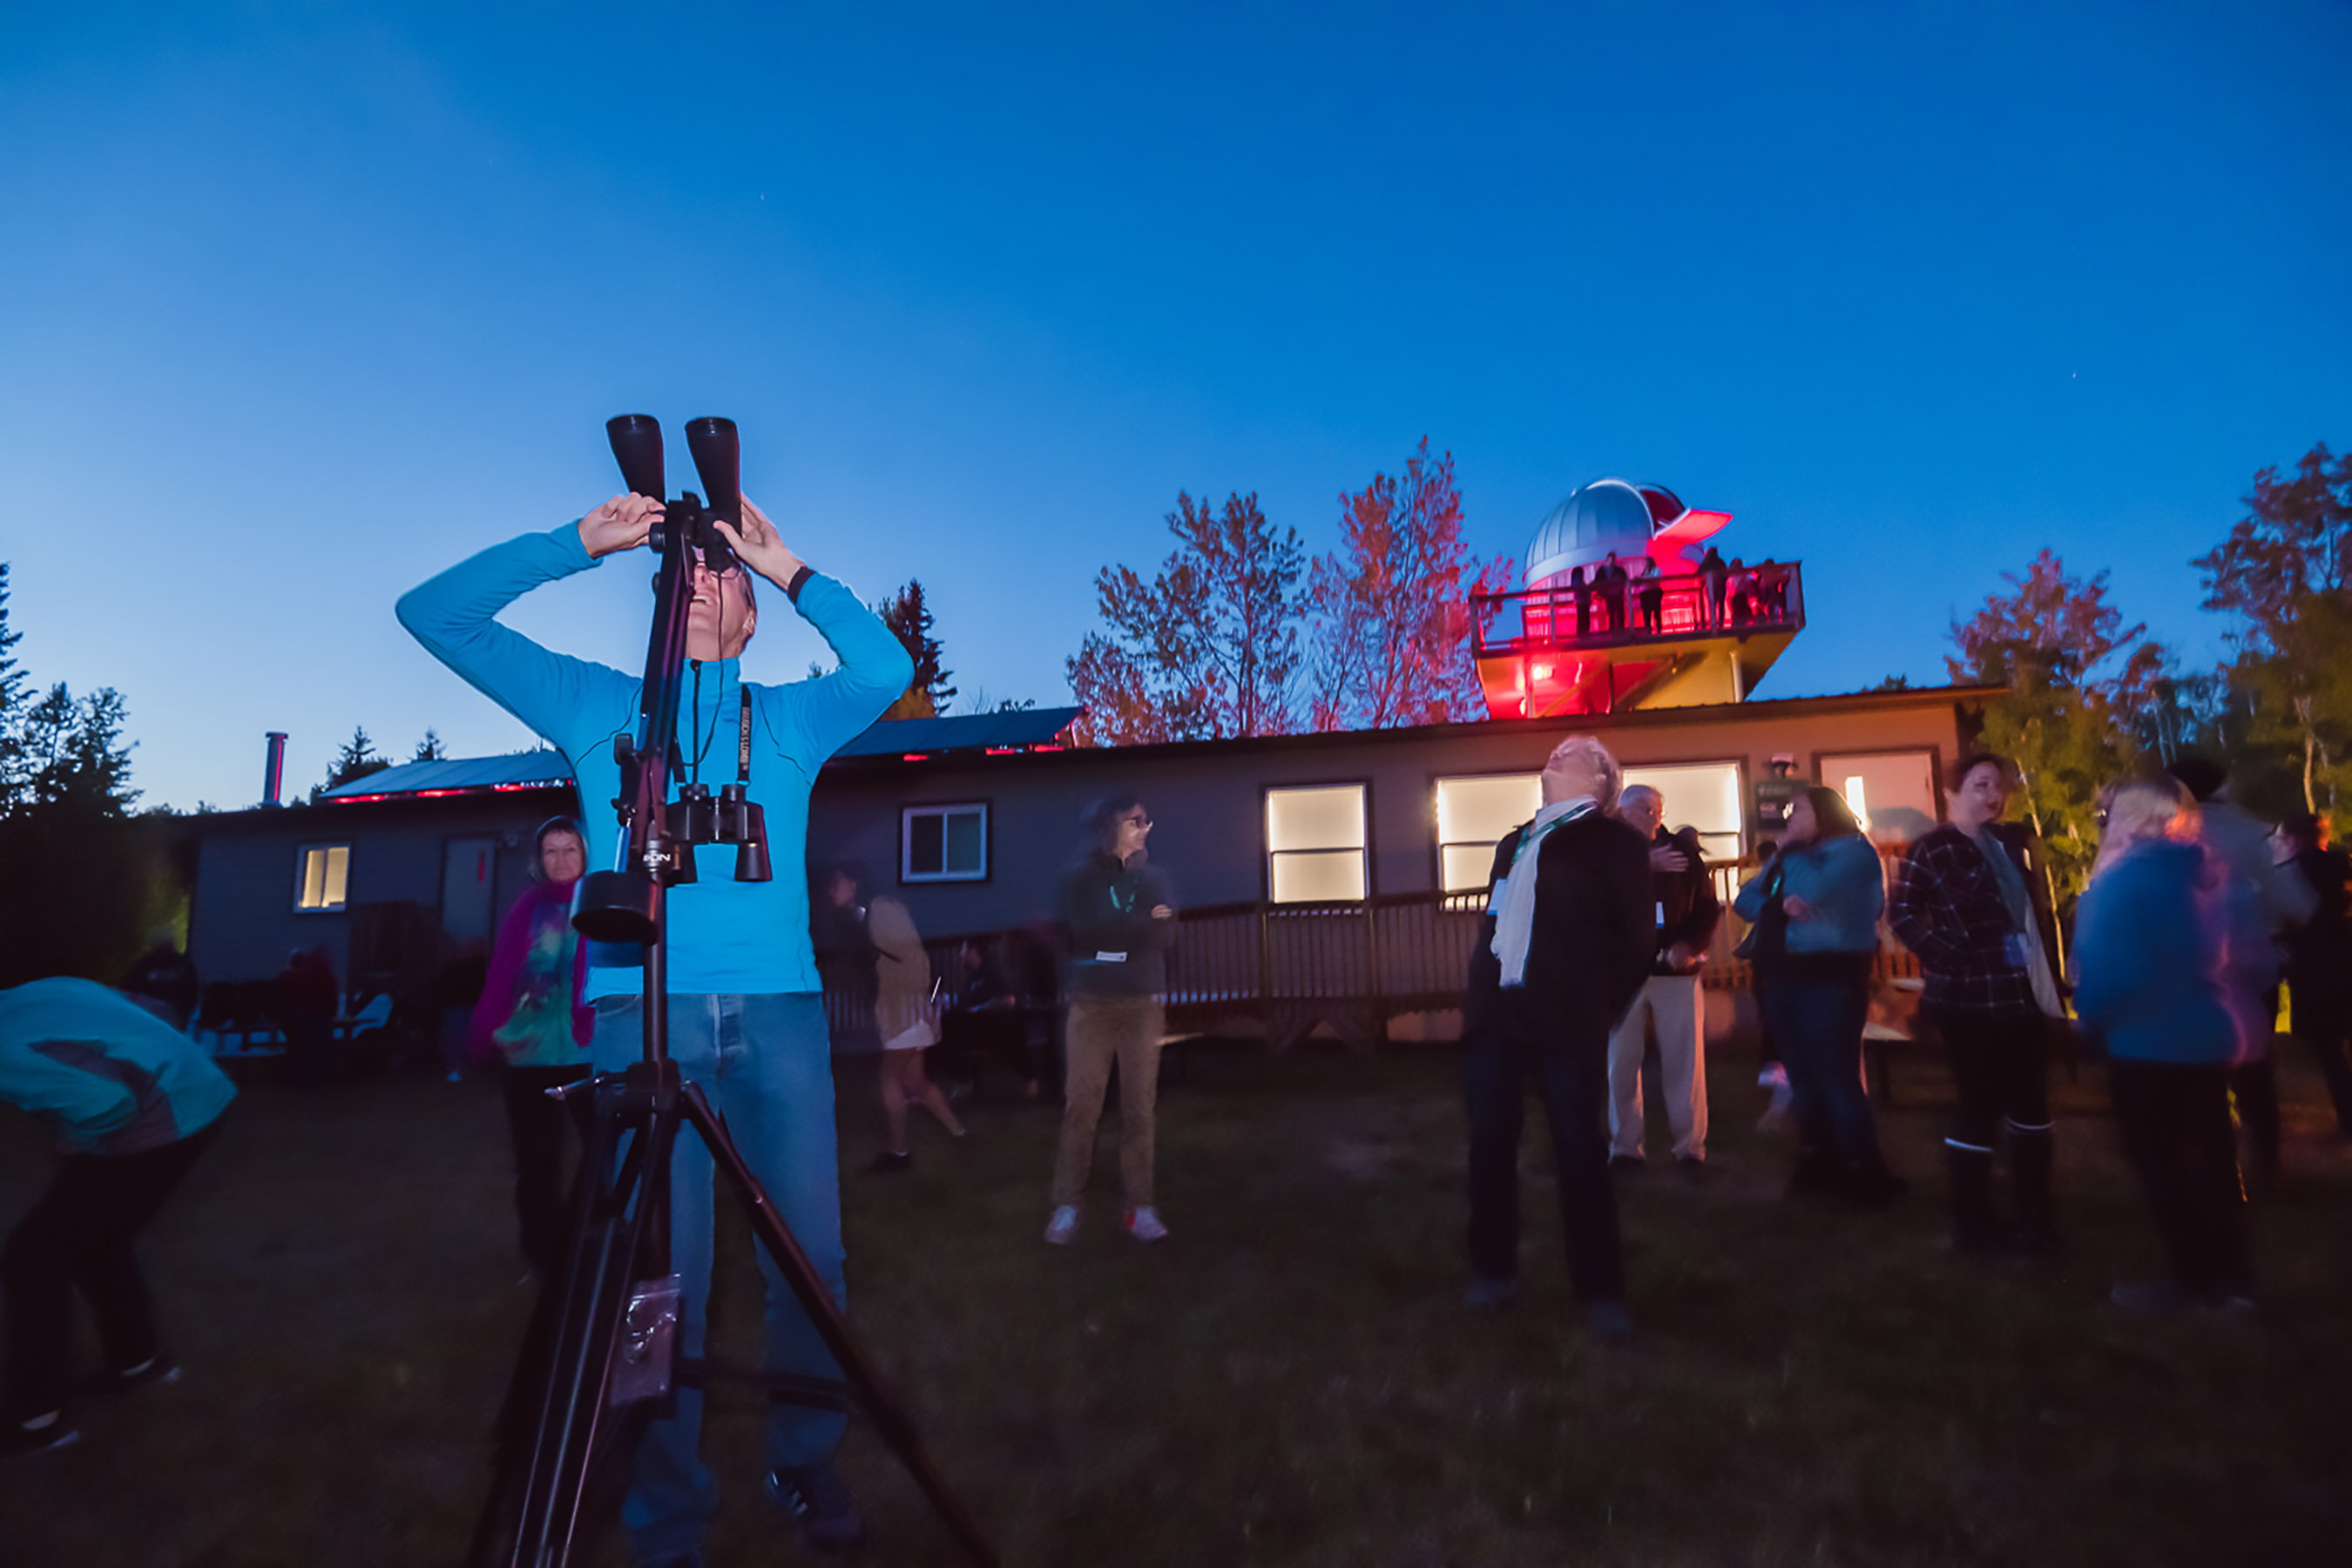 Looking at the night sky at the Hesje Observatory at Miquelon Lake